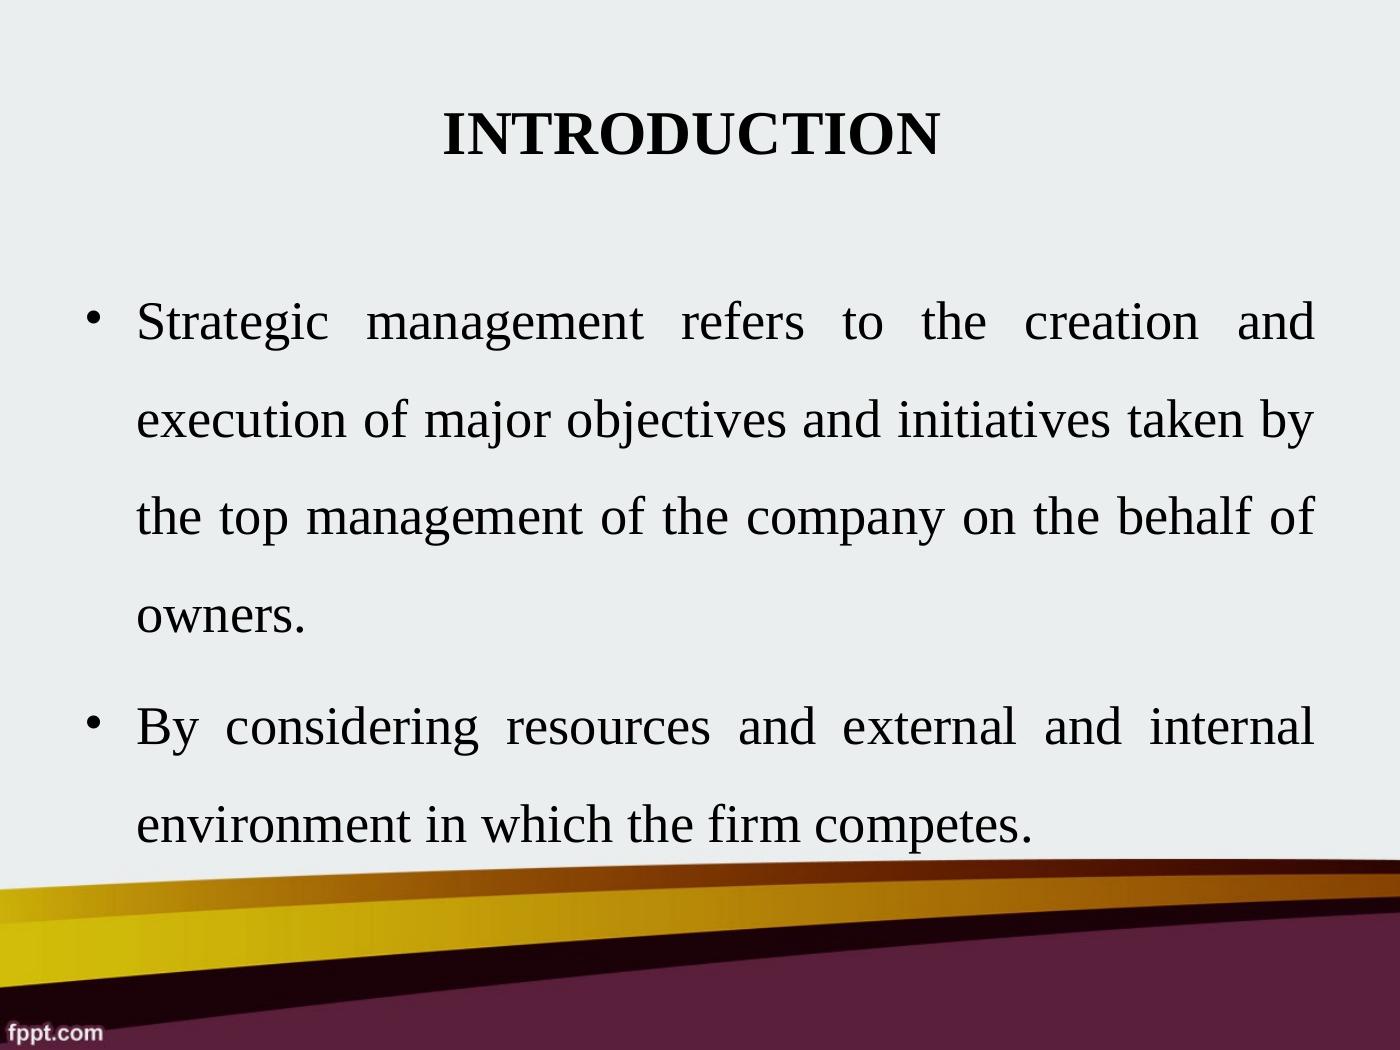 a case study in strategic management